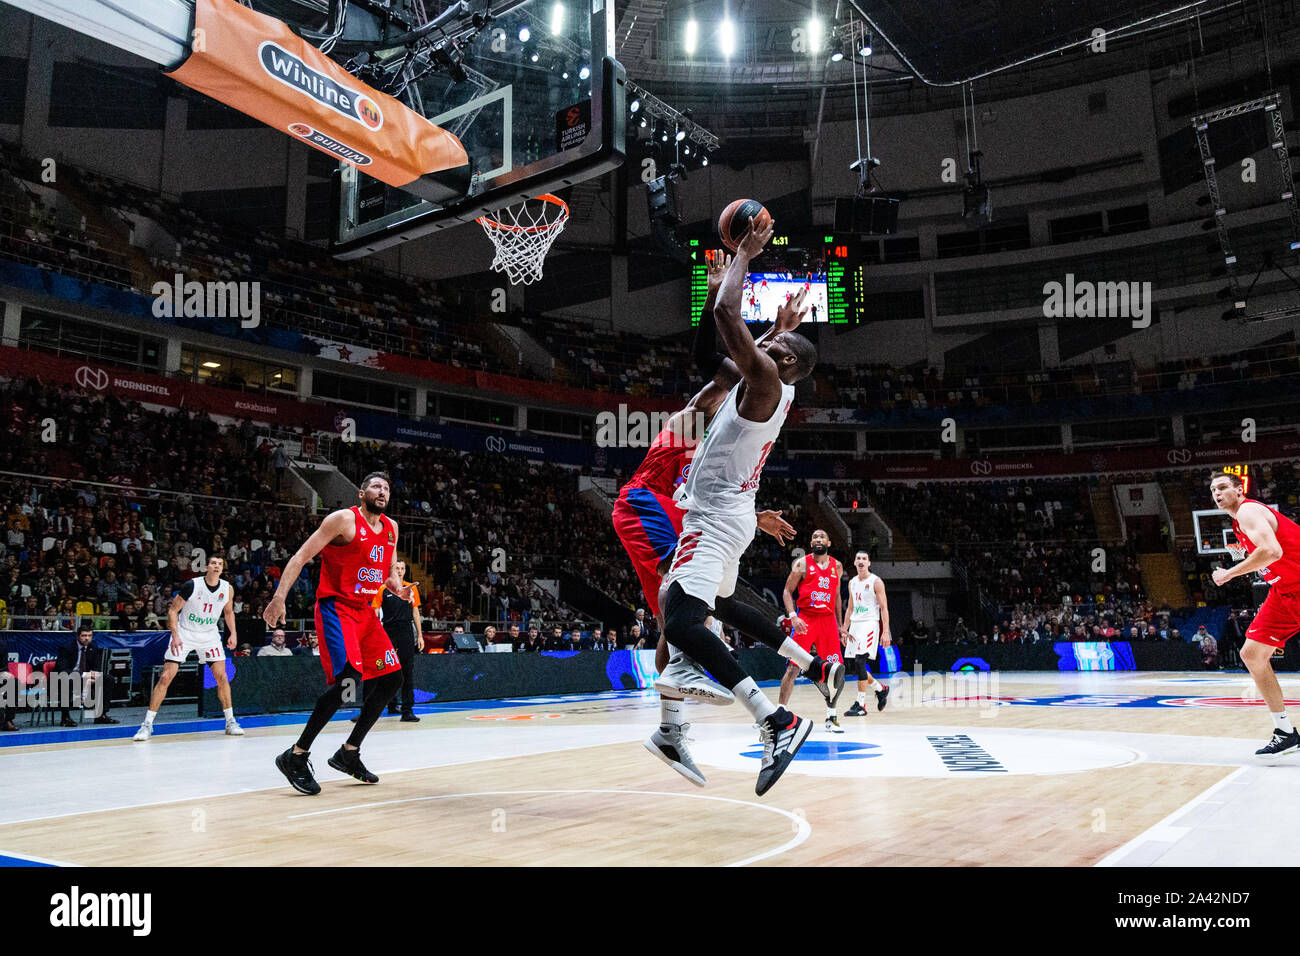 Greg Monroe, #10 of Bayern Munich in action against CSKA Moscow during the Turkish Airlines Euroleague Opening game of the 2019-2020 season.Final Score: CSKA Moscow 79 – 68 Bayern Munich. Stock Photo